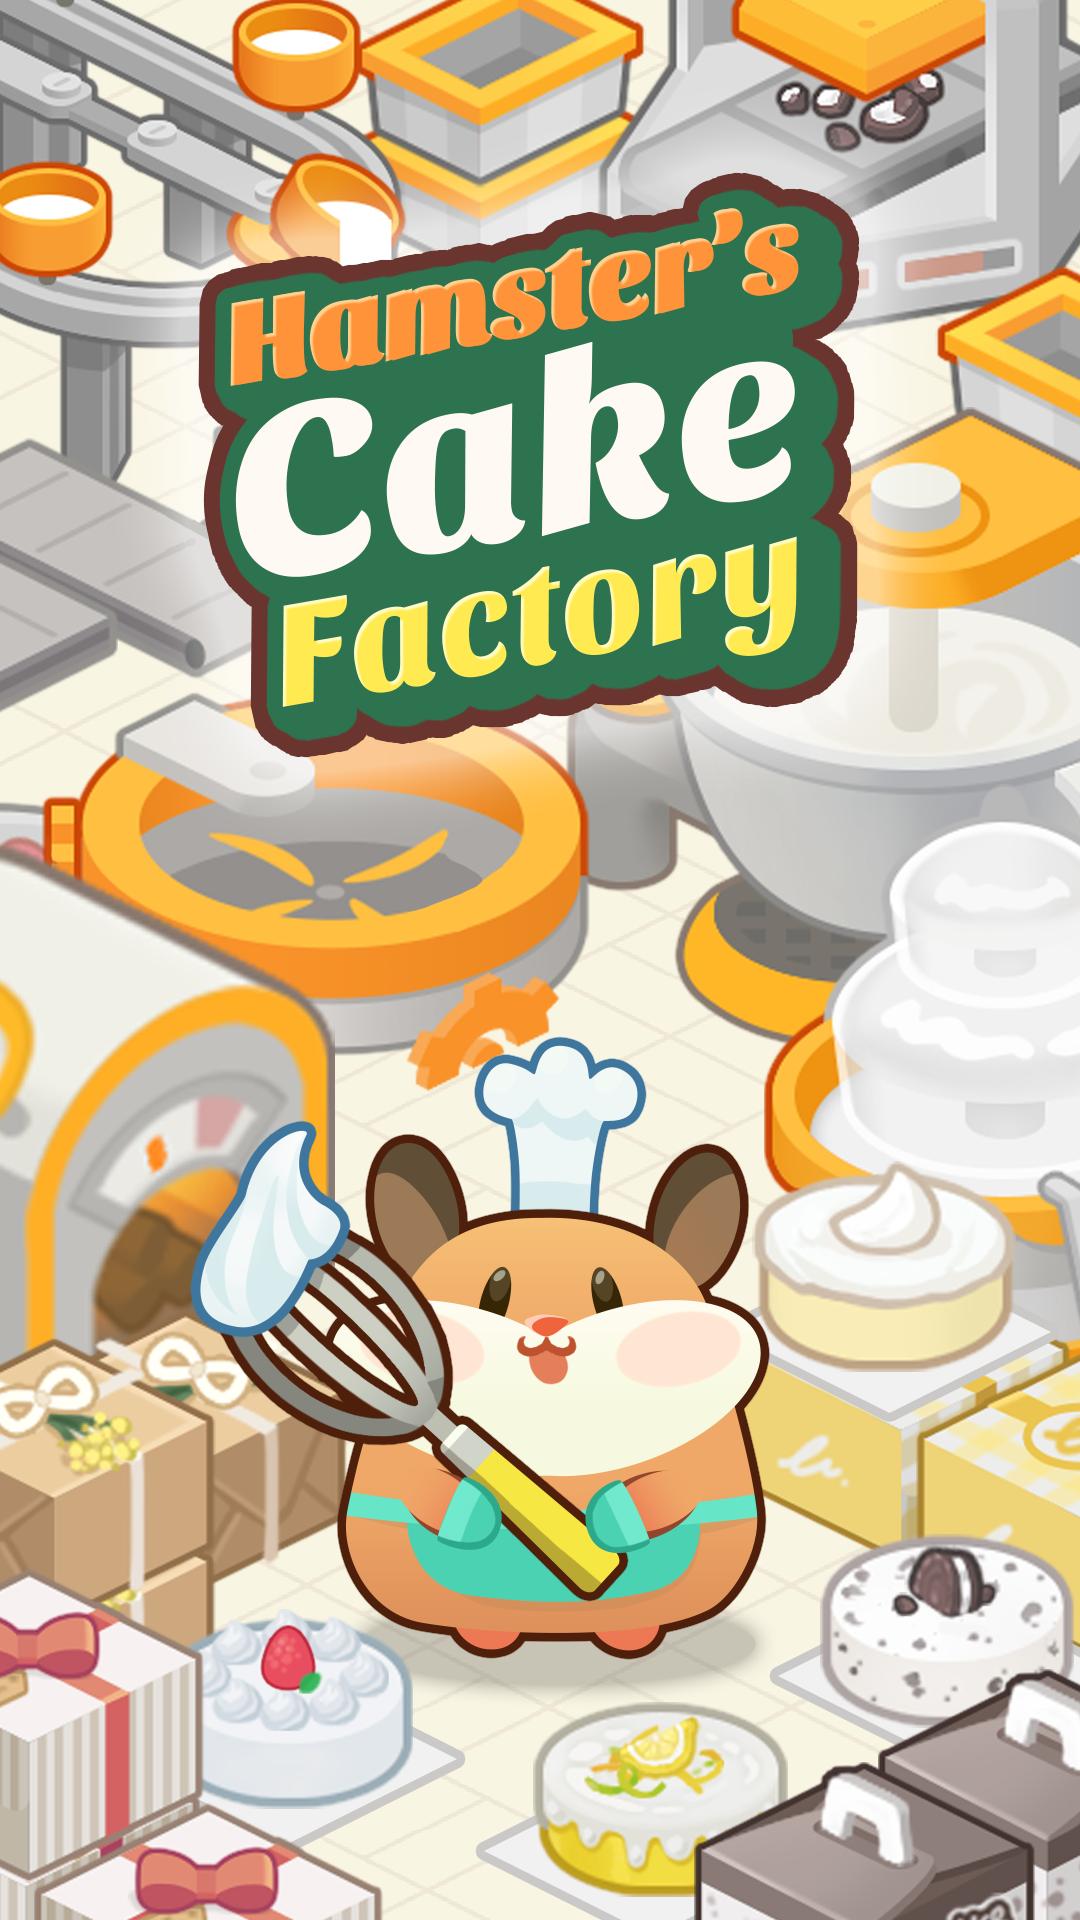 Hamster's Cake Factory - Idle Baking Manager 1.0.2 Screenshot 8